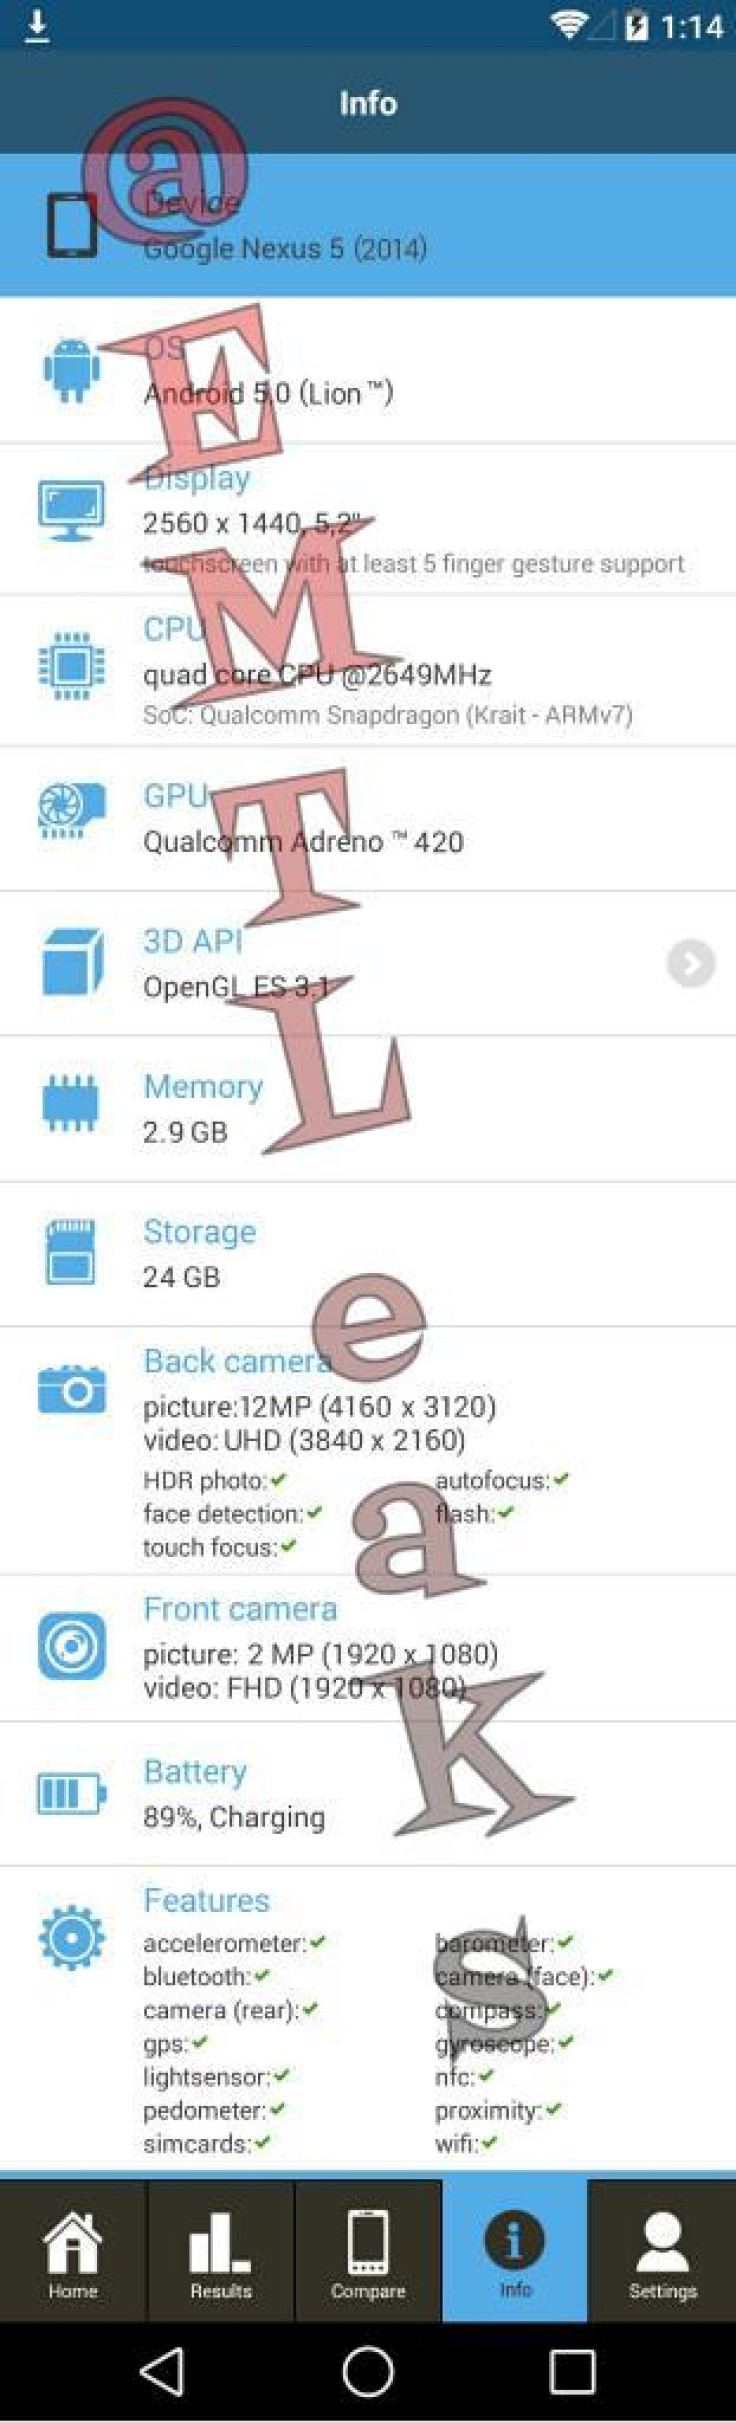 Nexus 5 (2014) with High-End Specs and Android 5.0 Lion Appears on GFXBench